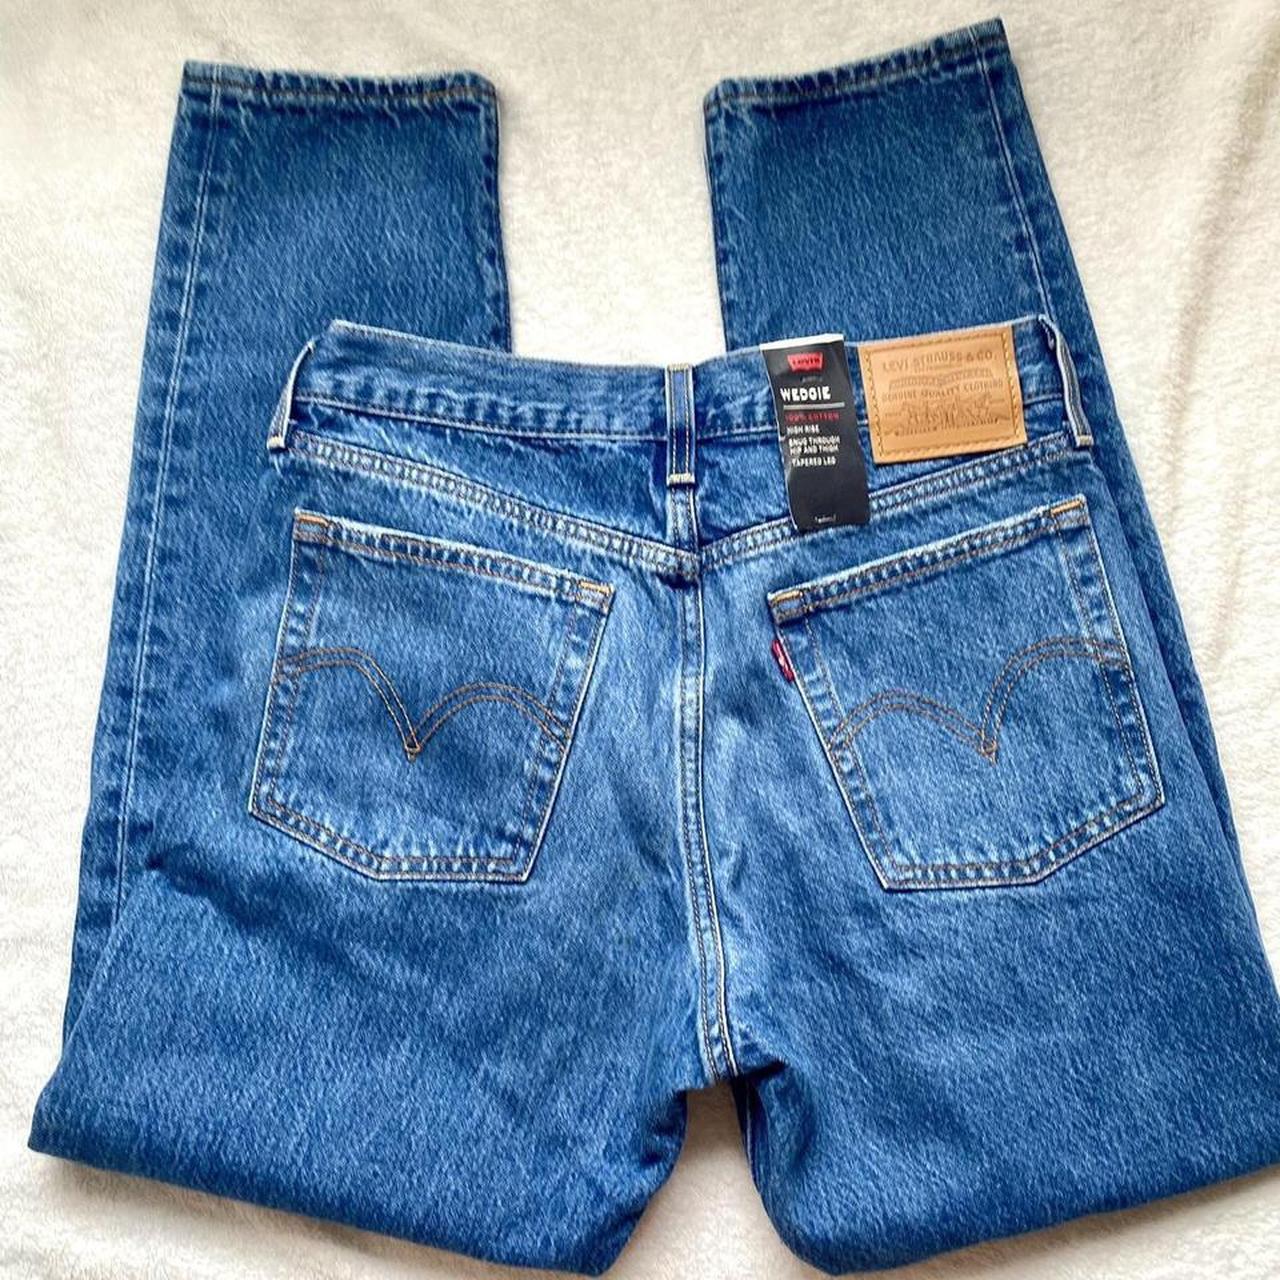 Size 27 Levi’s wedgie straight jeans Brand new with... - Depop